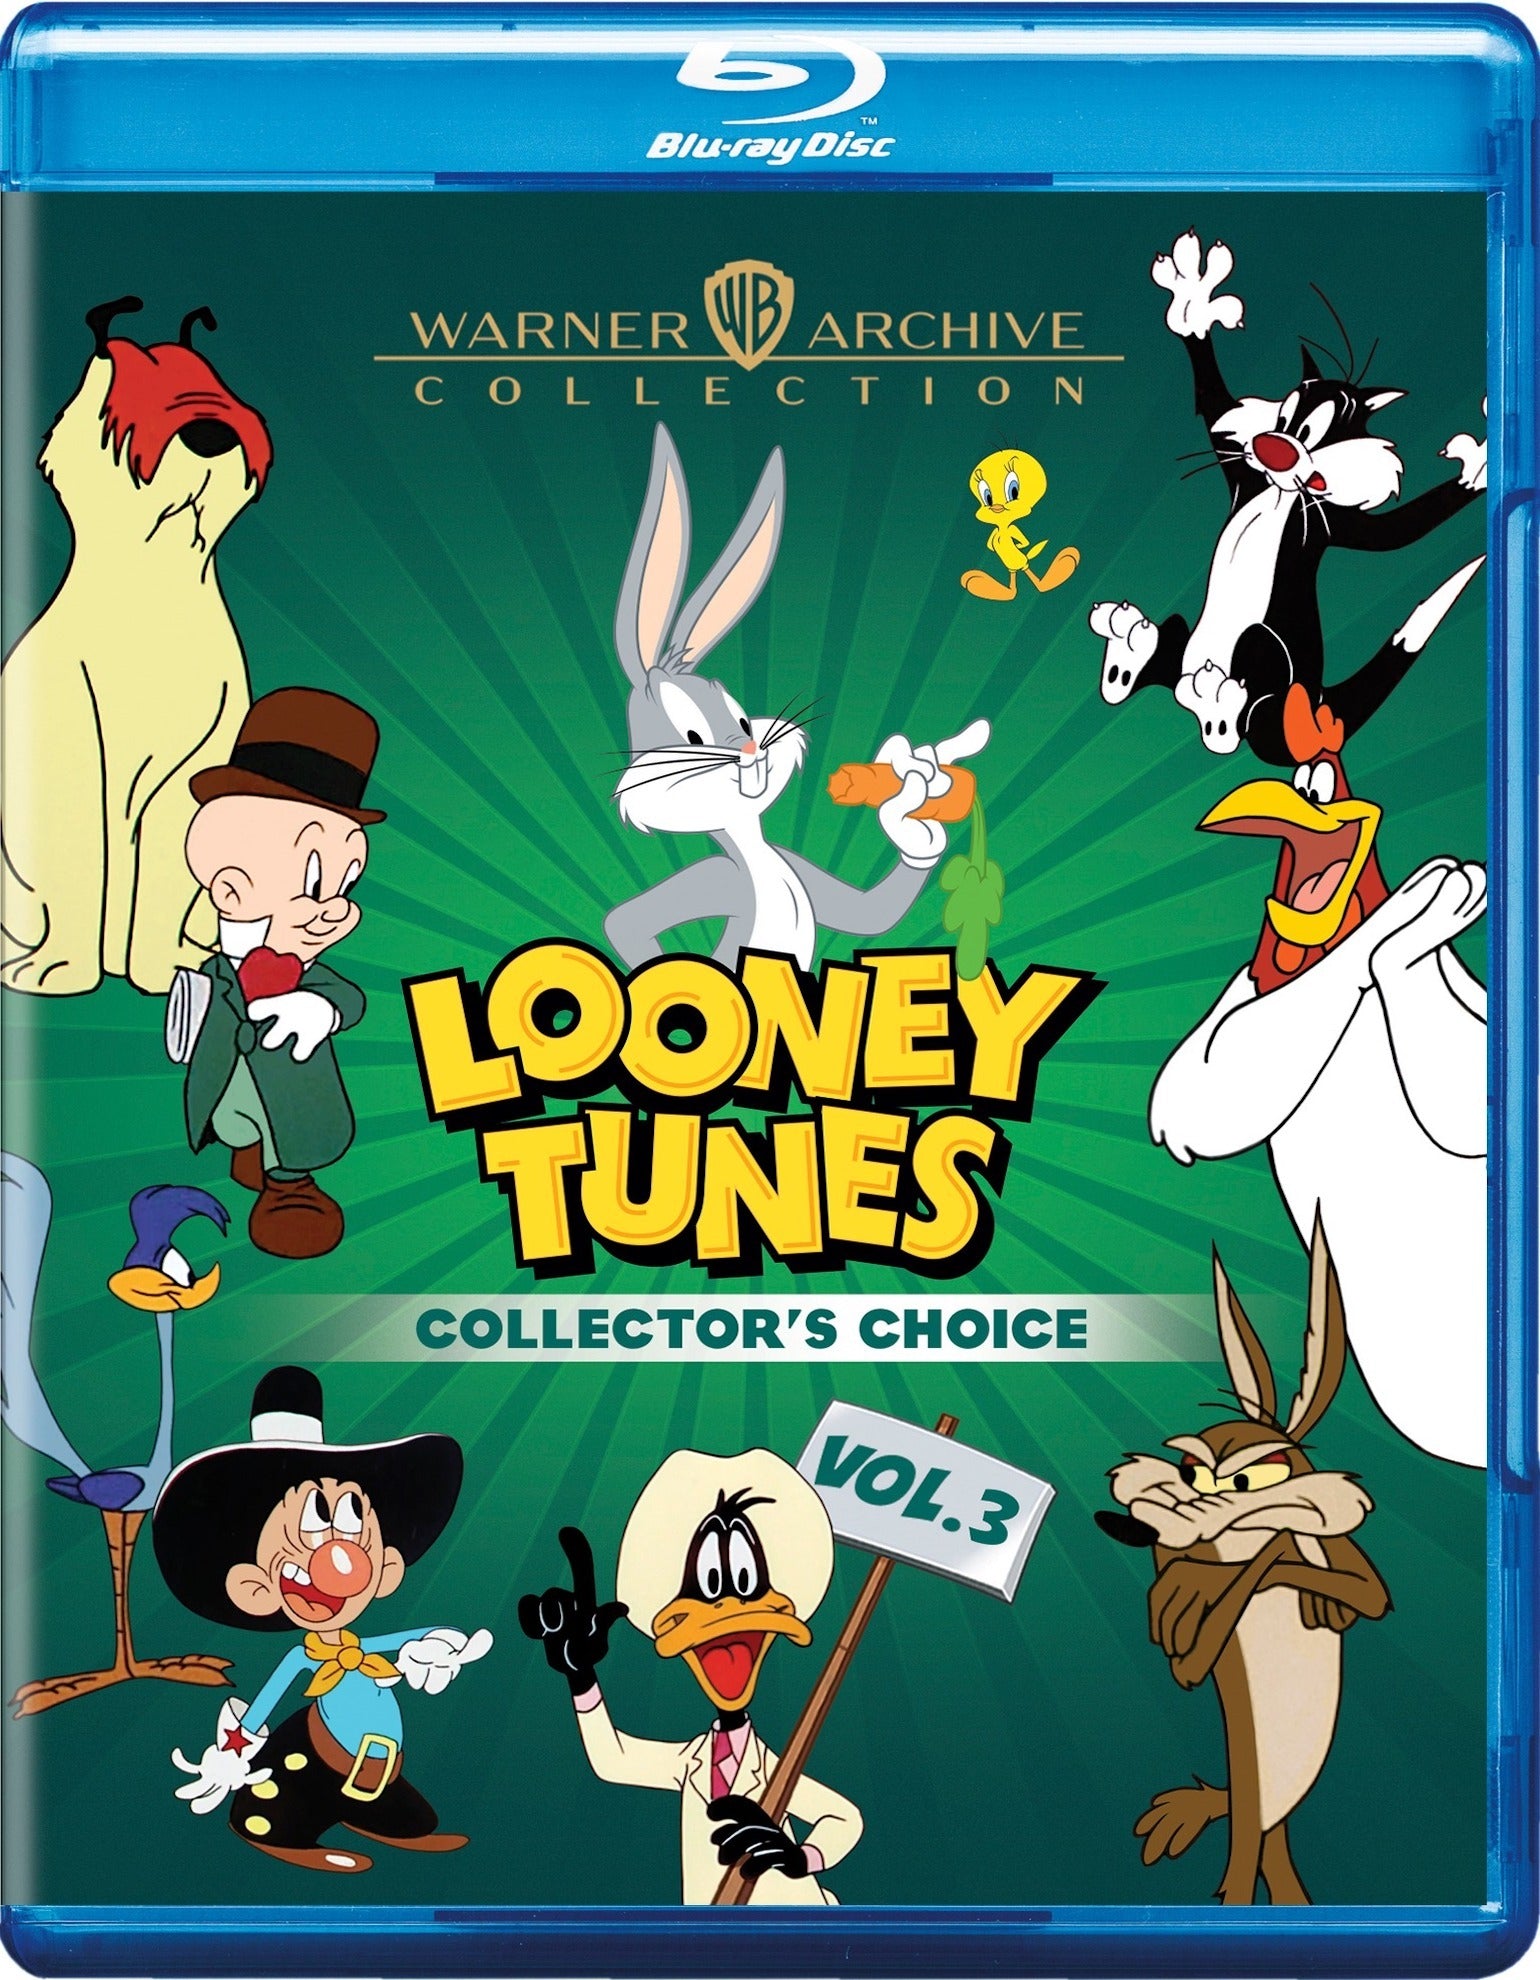 LOONEY TUNES COLLECTOR'S CHOICE VOLUME 3 BLU-RAY